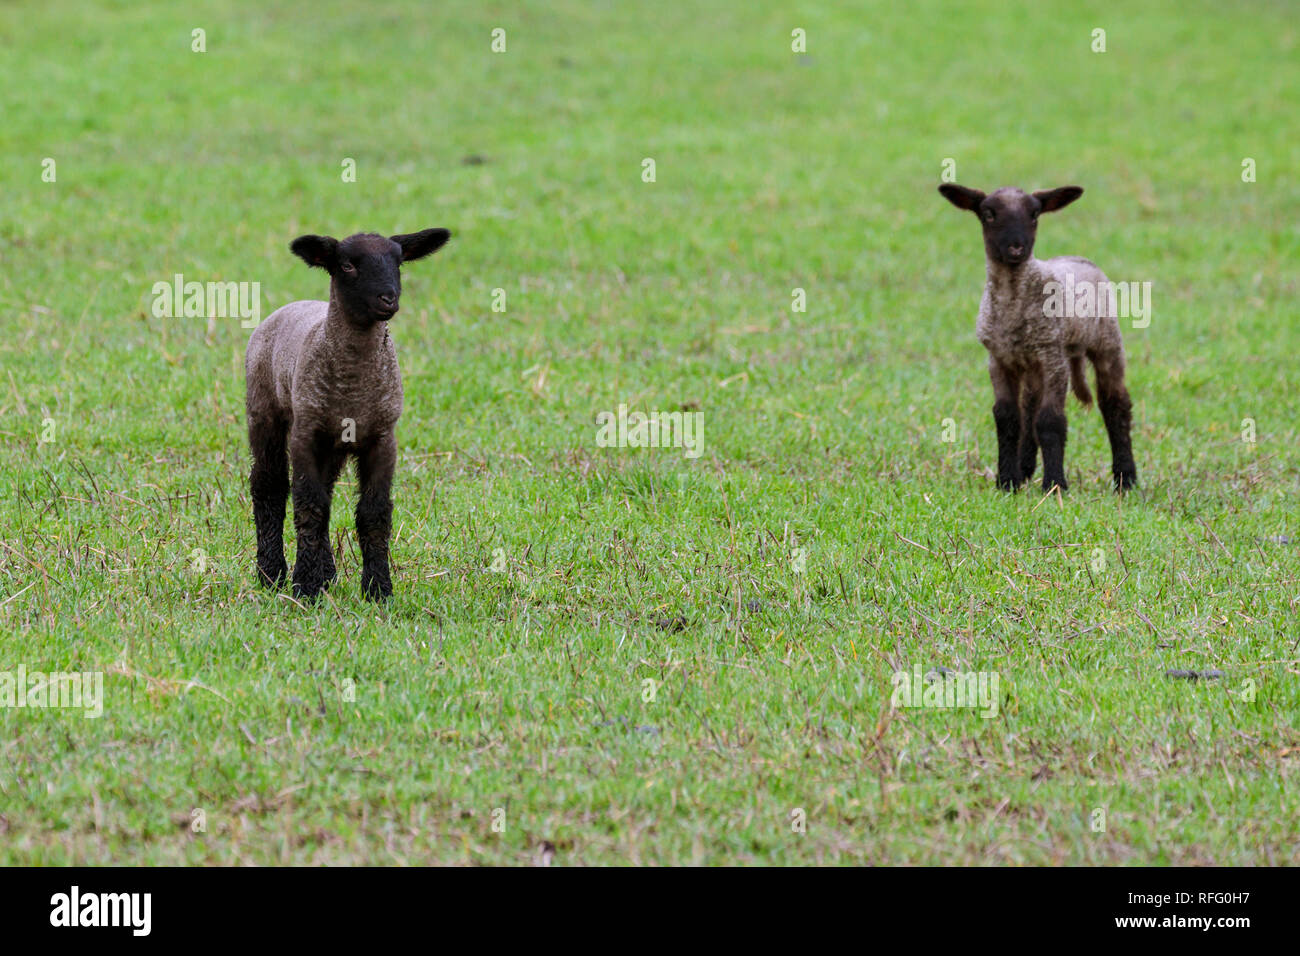 Two new spring lambs in a field in the Willamette Valley in rural Oregon, USA. Stock Photo